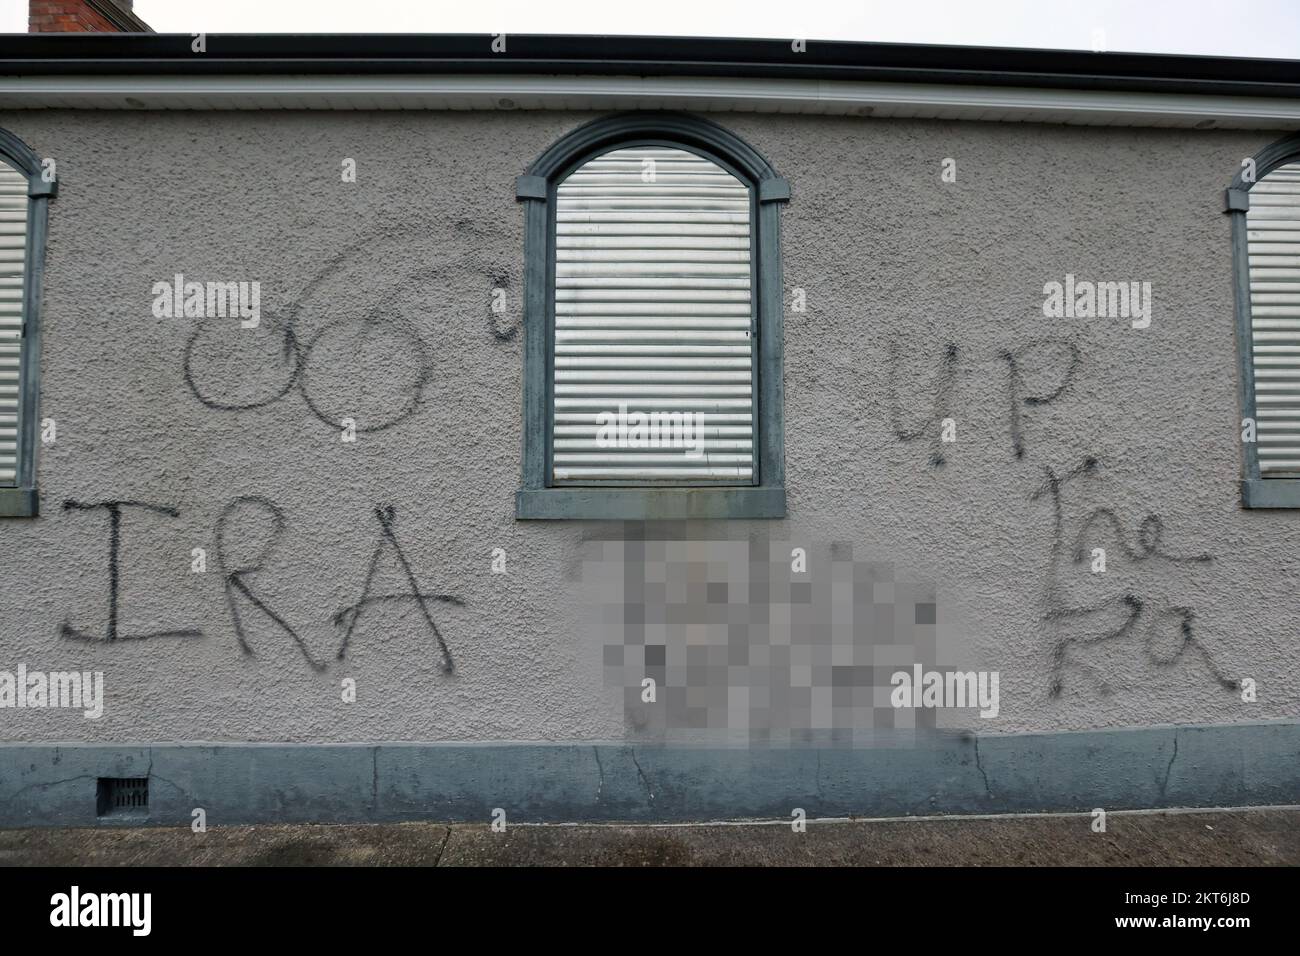 RETRANSMITTED WITH NAME PIXELATED BY PA PICTURE DESK EDITORS NOTE CONTENT Orange Hall on Crosskeys Road, Keady as police are investigating after pro-IRA graffiti was daubed on the hall in Co Armagh. A PSNI spokesperson said the incident occurred at some time between 10pm on Monday and Tuesday morning. The spokesperson added that the incident was being treated as a sectarian hate crime. Picture date: Tuesday November 29, 2022. Stock Photo